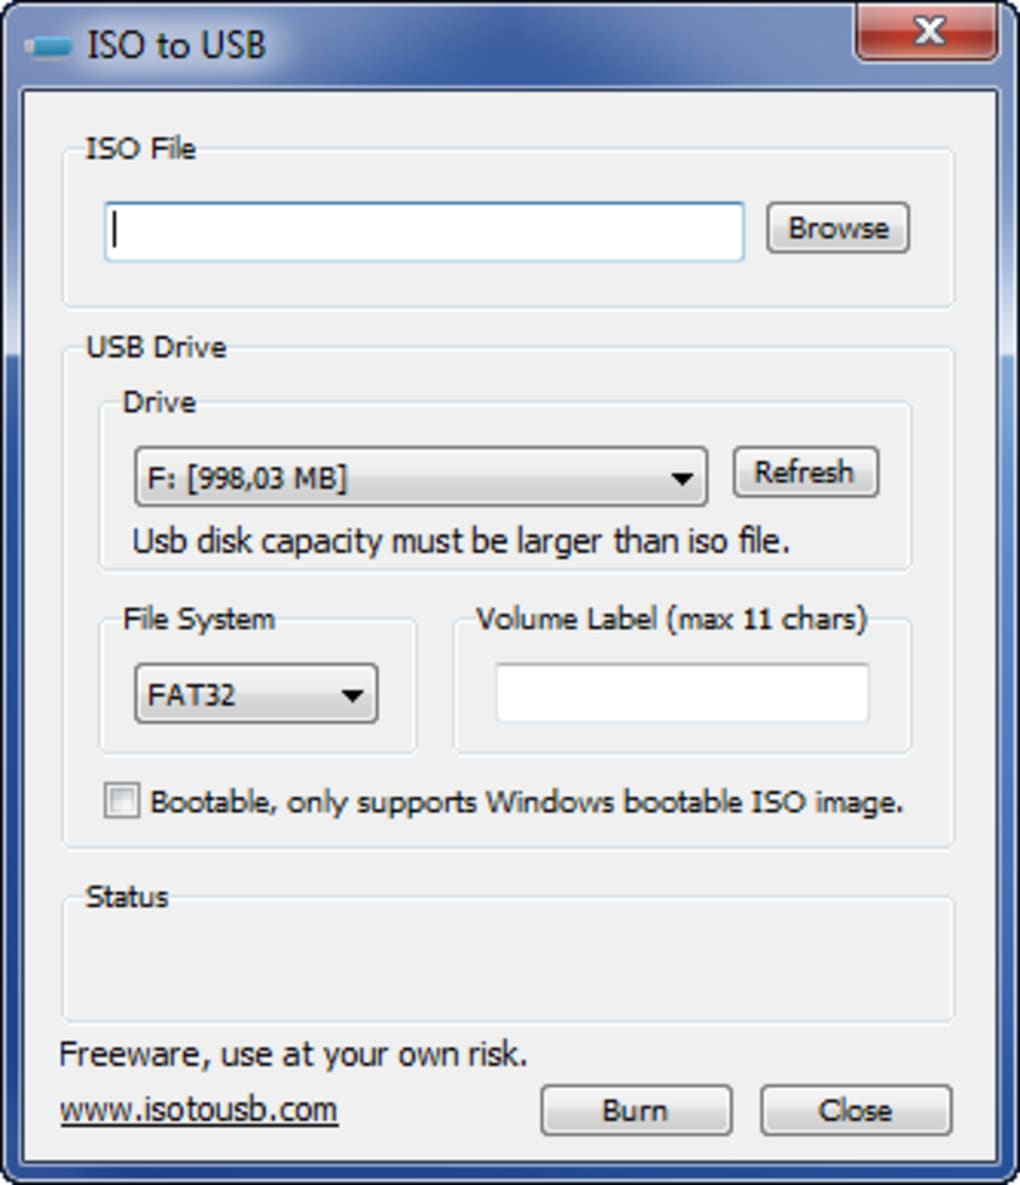 aluminium indre acceptabel ISO to USB - Download